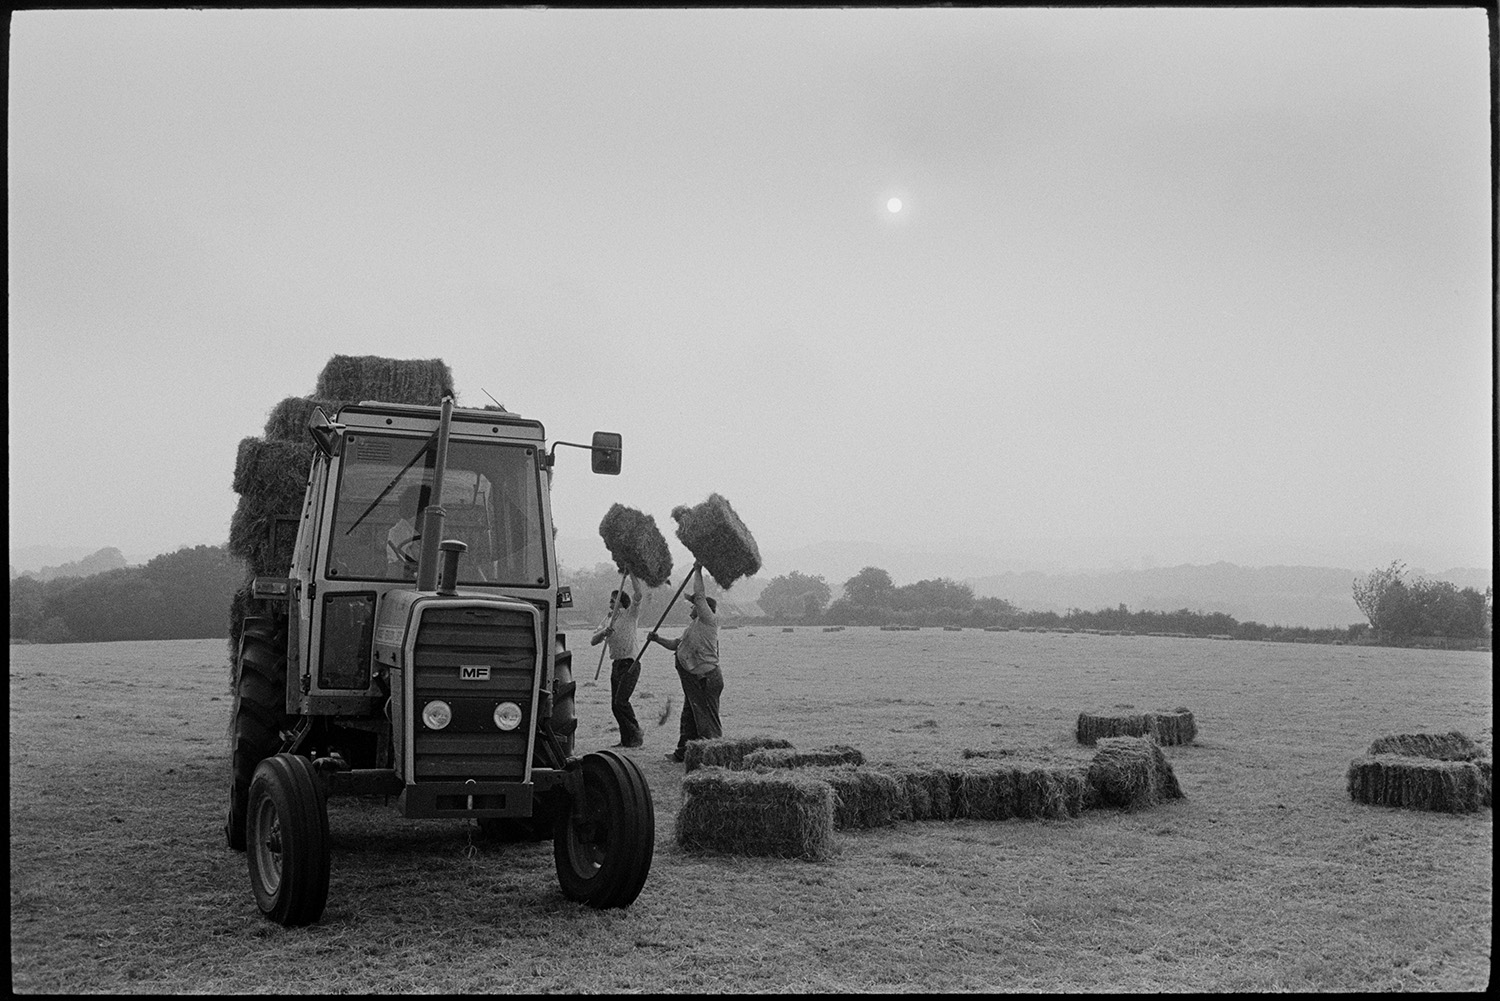 Haymakers loading trailer, evening. 
[Men loading hay bales onto a tractor and trailer, using pitchforks, in a field at Staple Cross, Dolton, in the evening.]